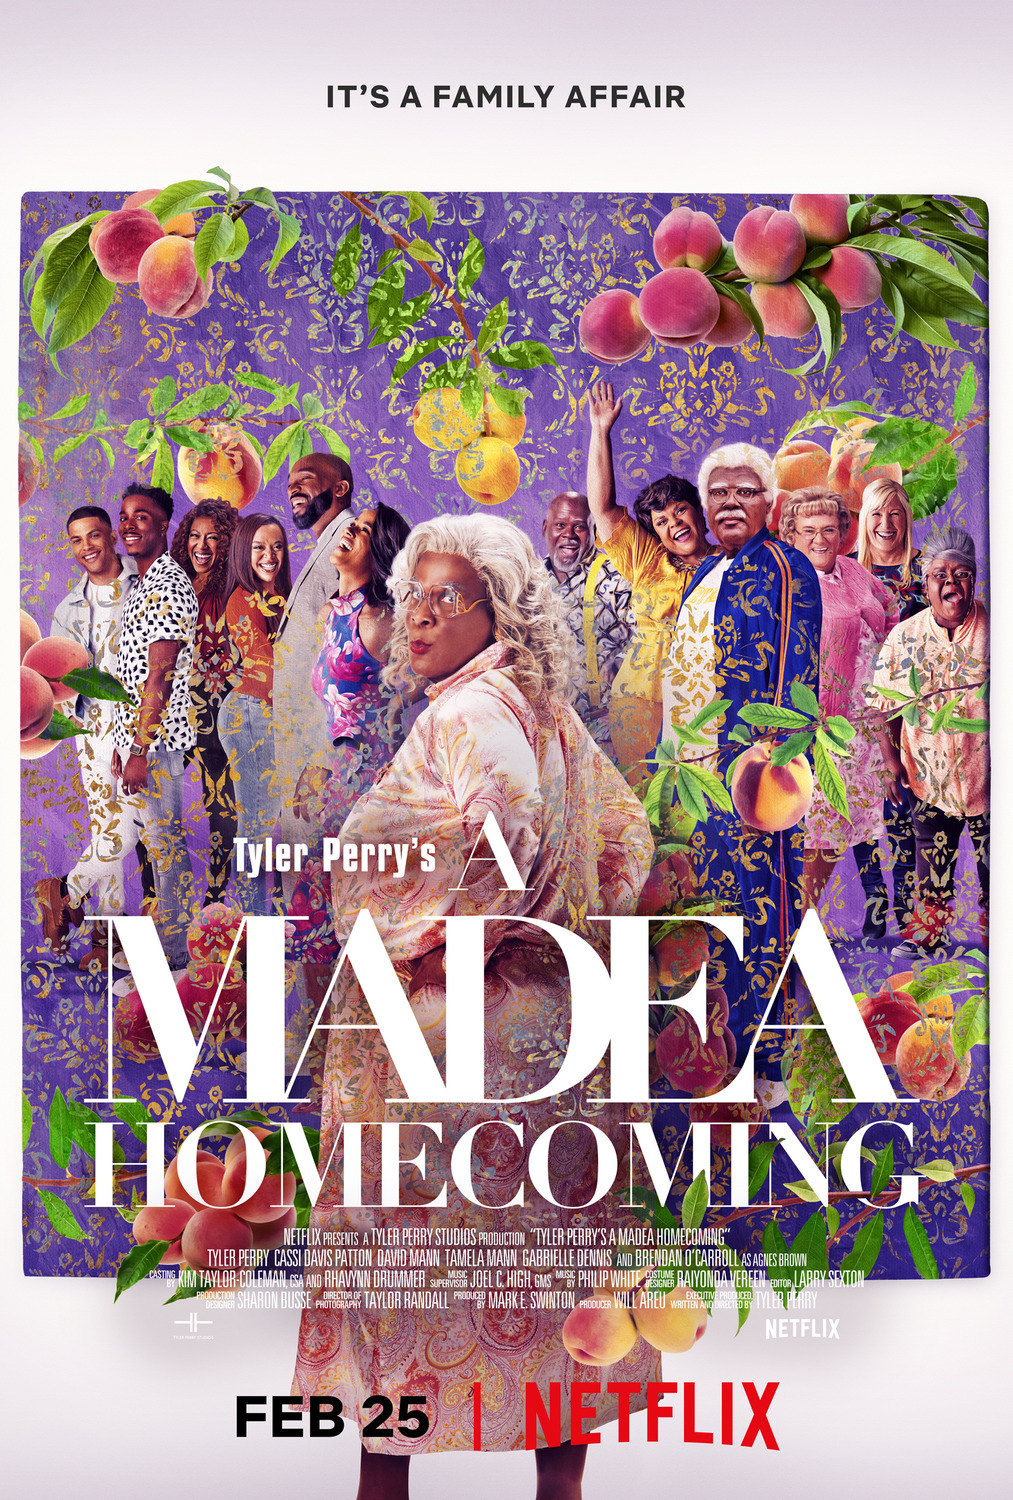 Tyler Perry’s A Madea Homecoming.jpg